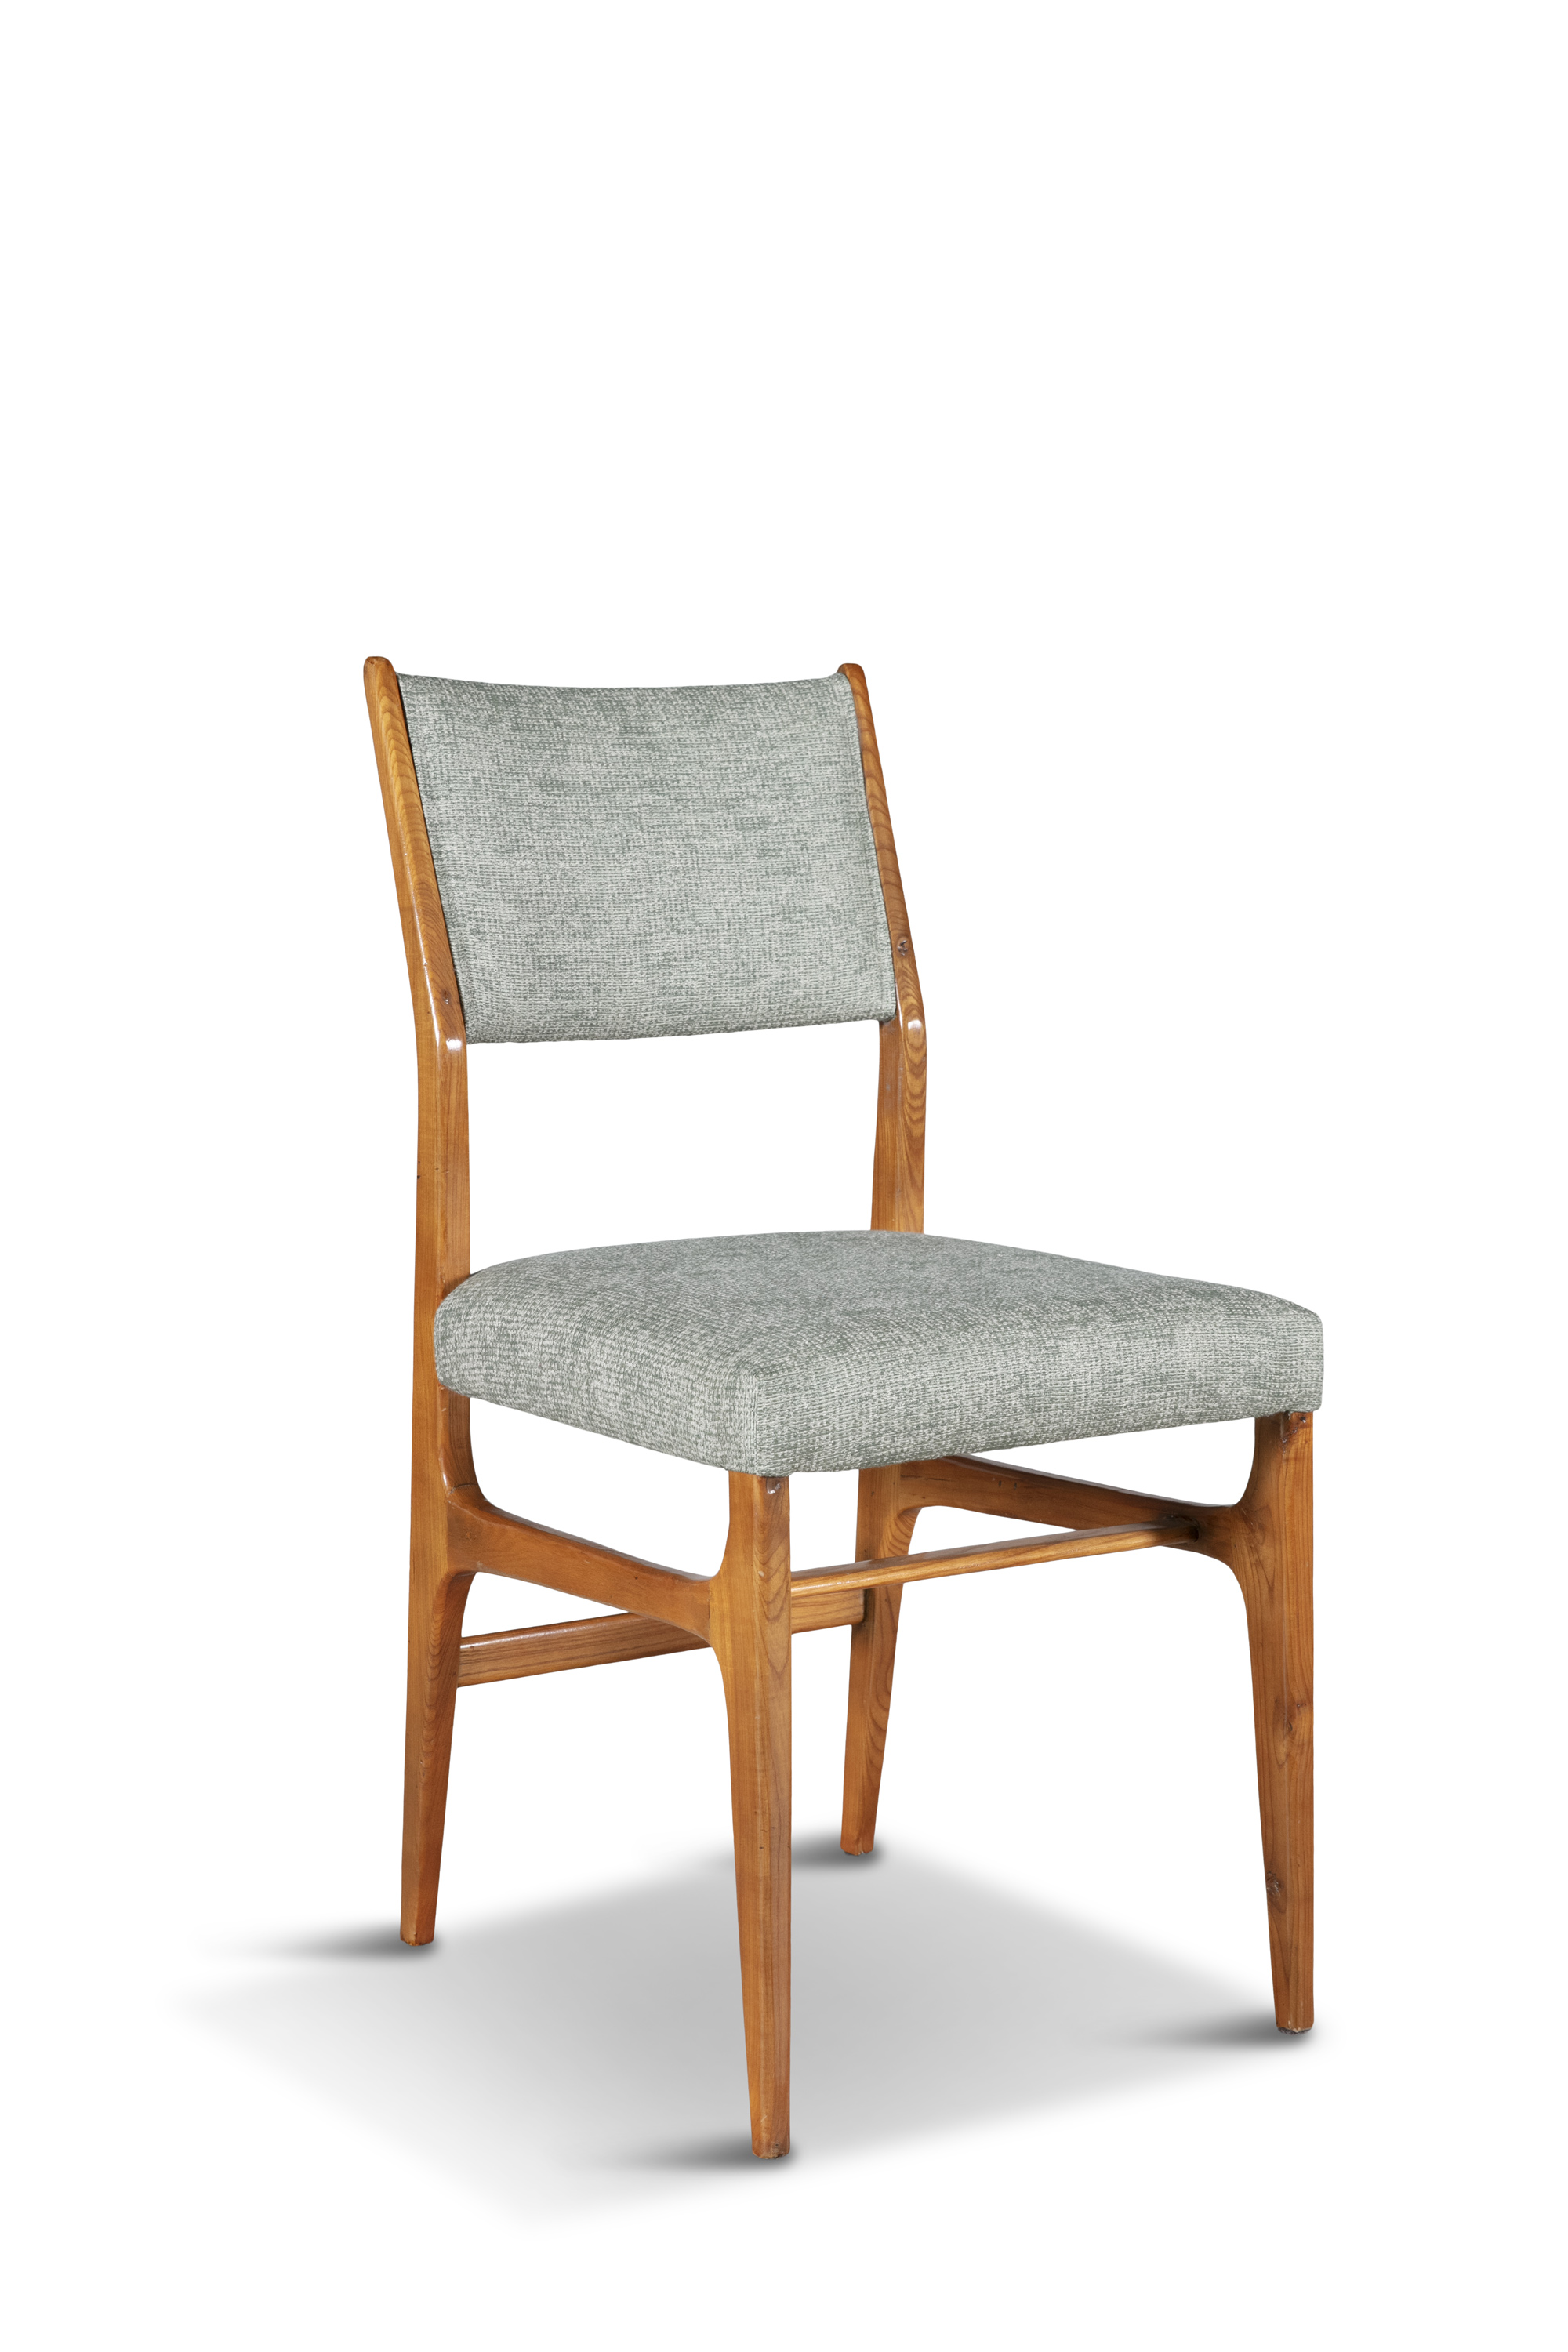 GIO PONTI A set of six 'Model 602' dining chairs by Gio Ponti, Italy c.1955. 86 x 43 x 45cm With - Image 3 of 4